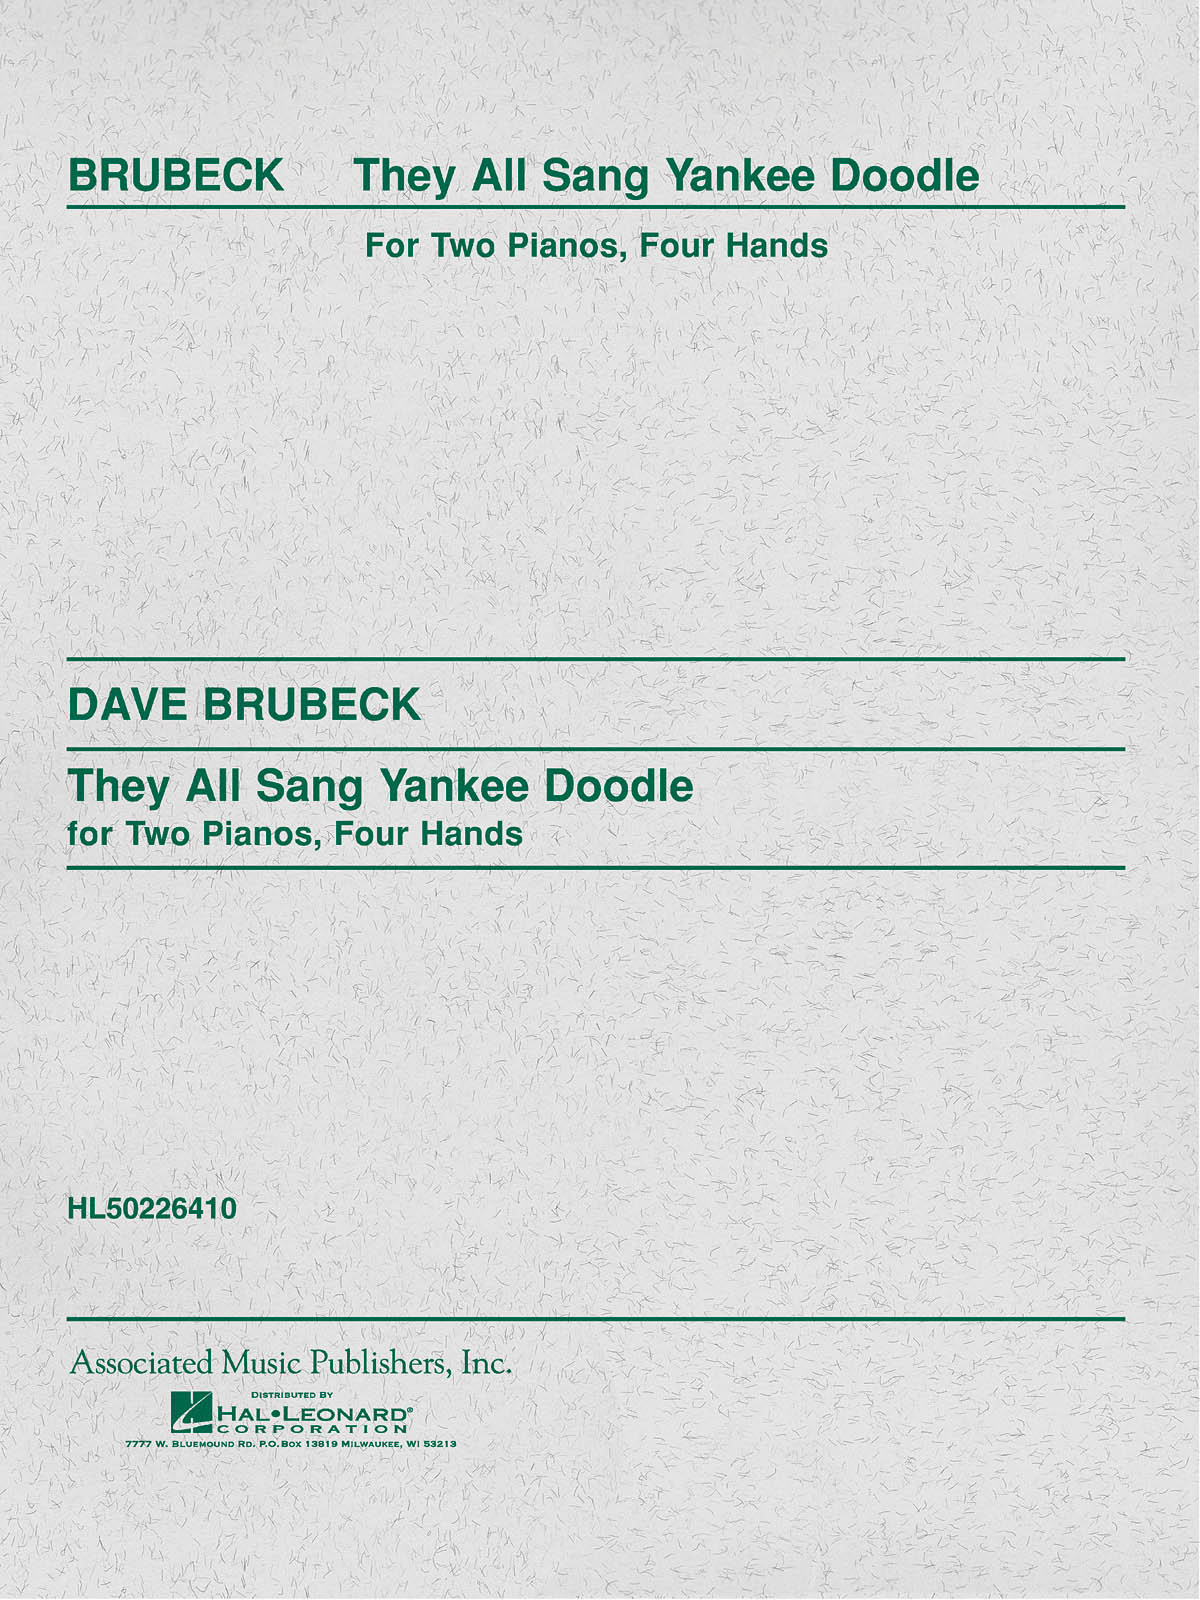 Brubeck They All Sang Yankee Doodle 2 Pianos Sheet Music Songbook